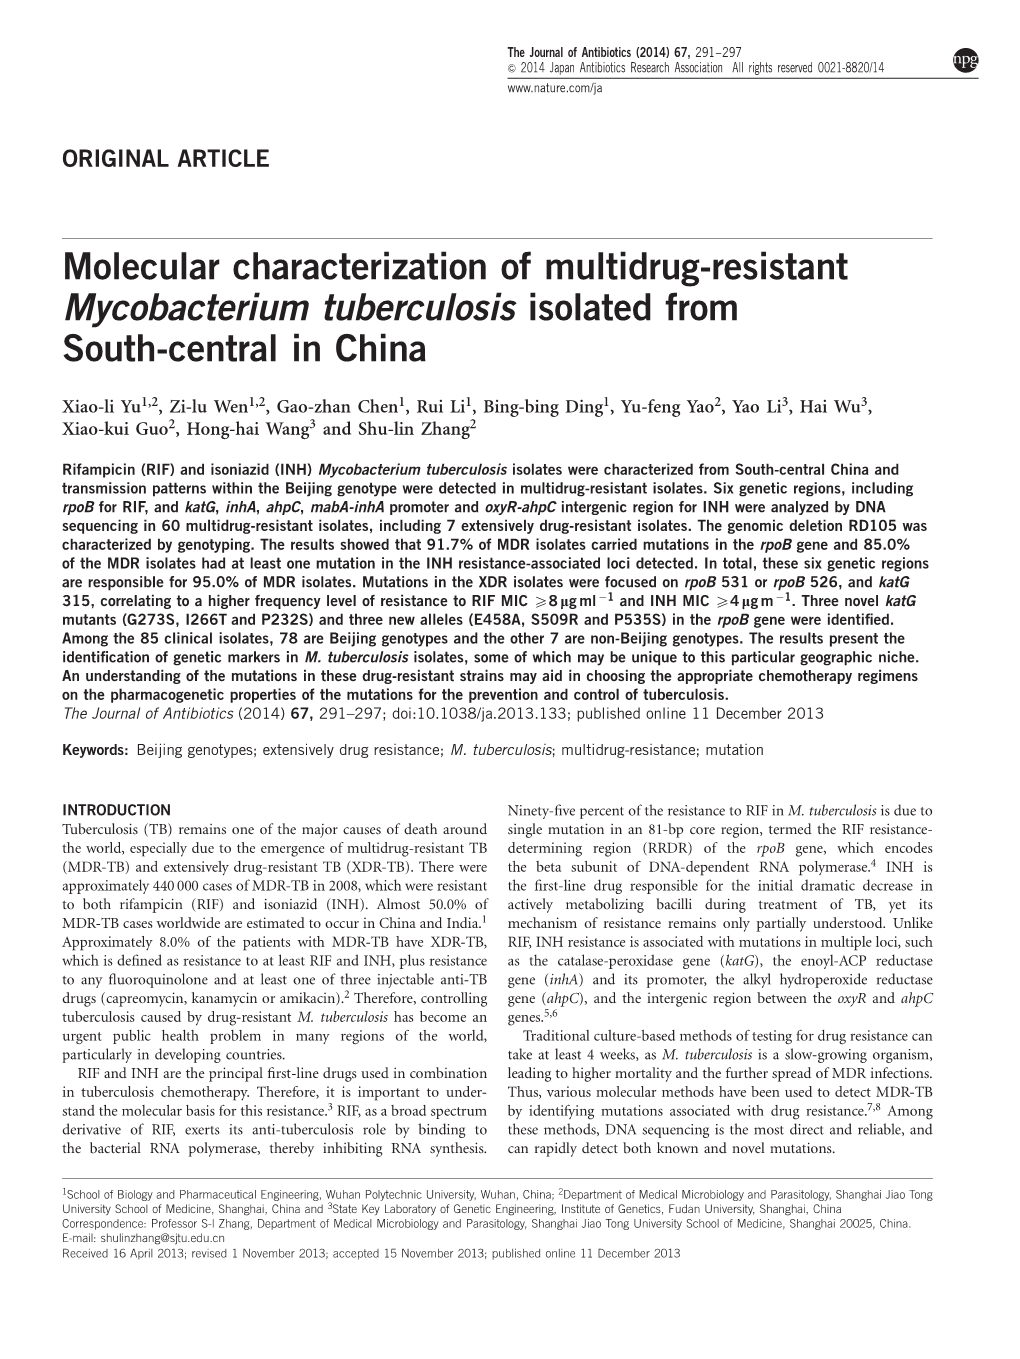 Molecular Characterization of Multidrug-Resistant Mycobacterium Tuberculosis Isolated from South-Central in China